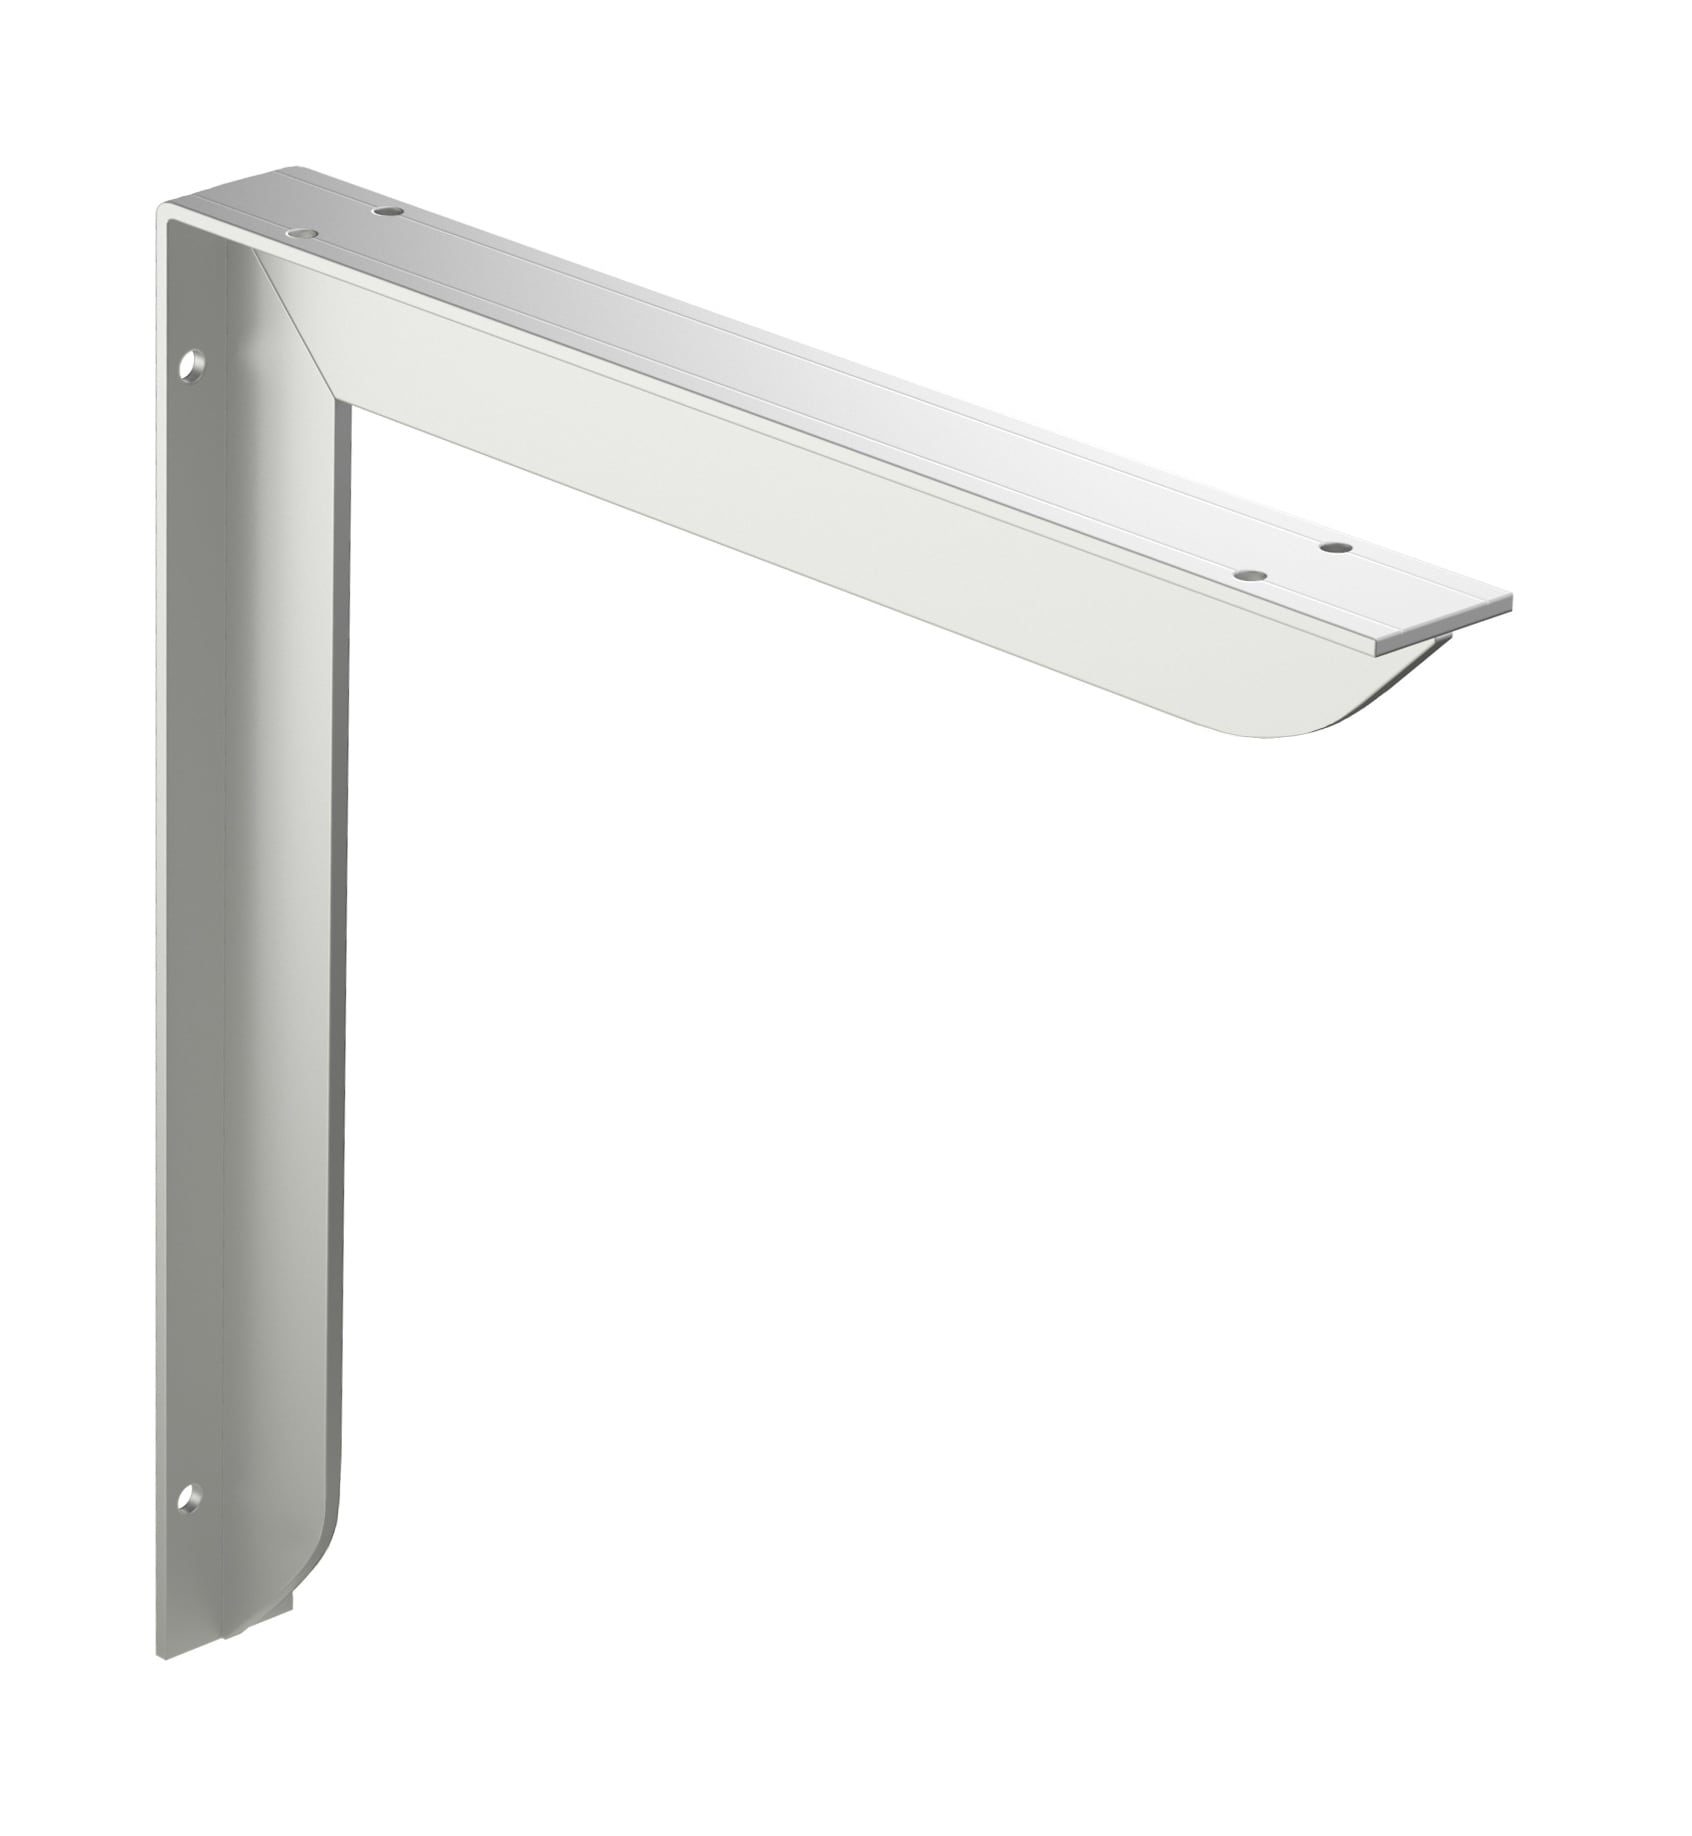 EH Countertop Support Bracket with Rounded Ends - EHR